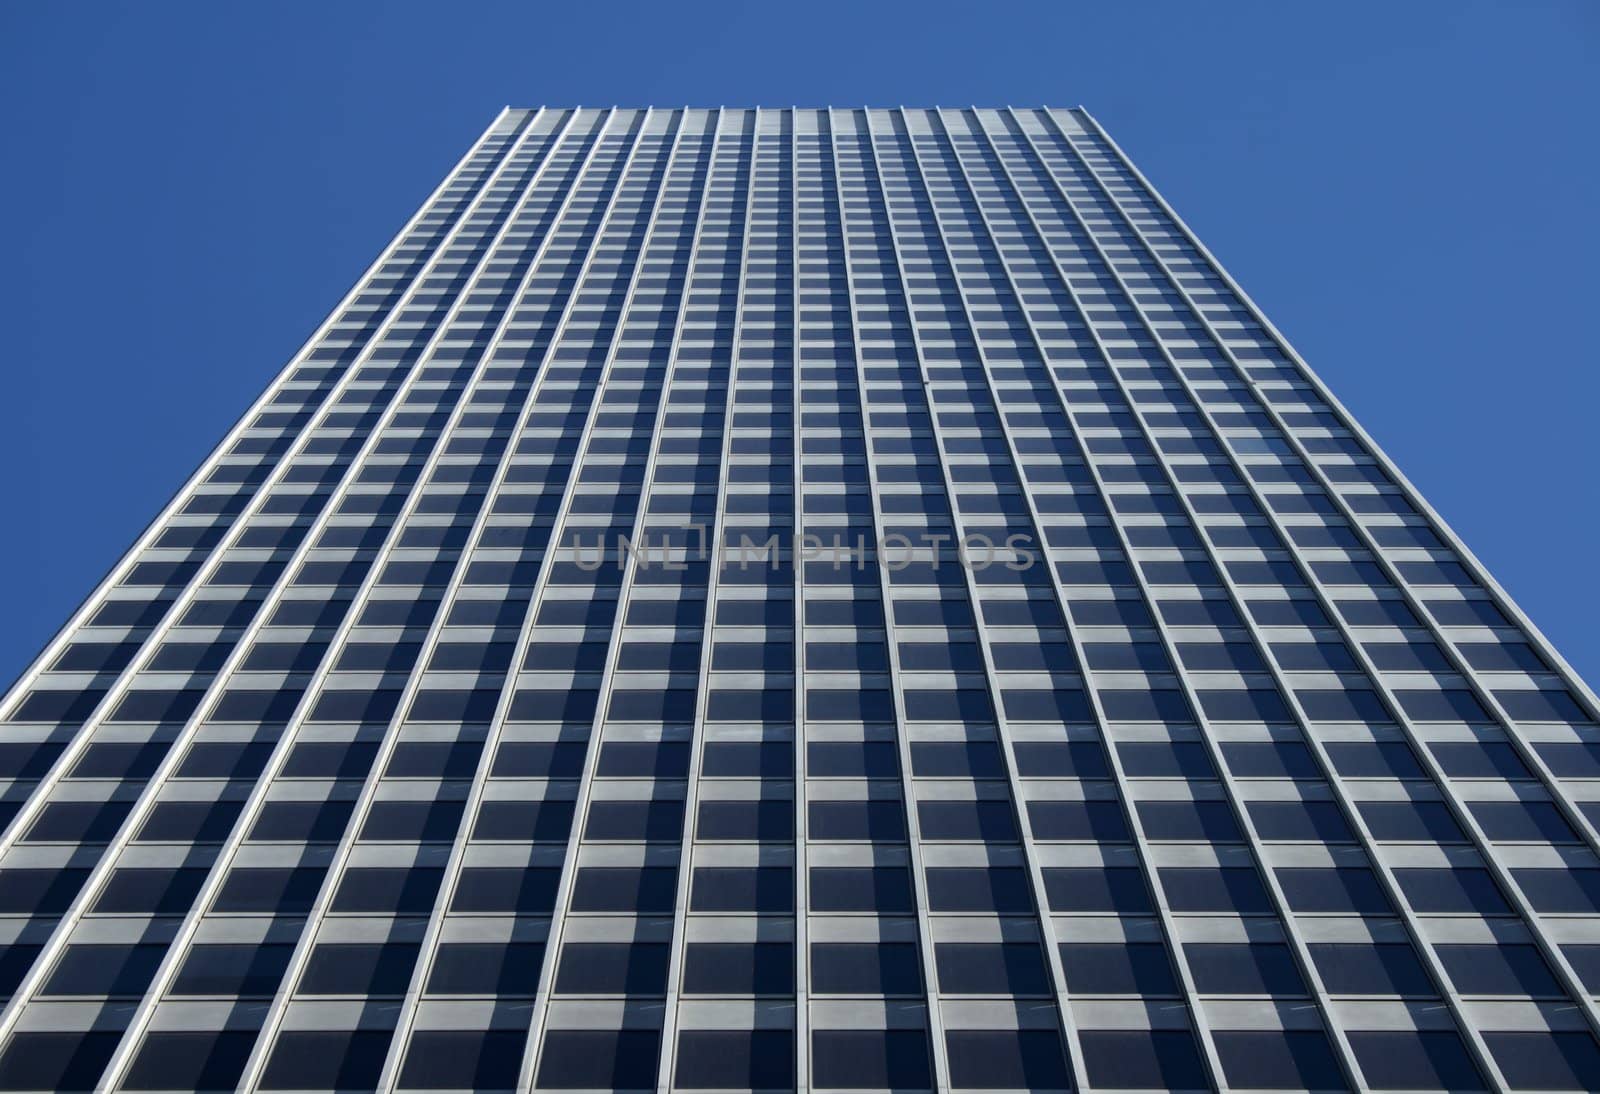 Perspective view of the gray office building by anikasalsera